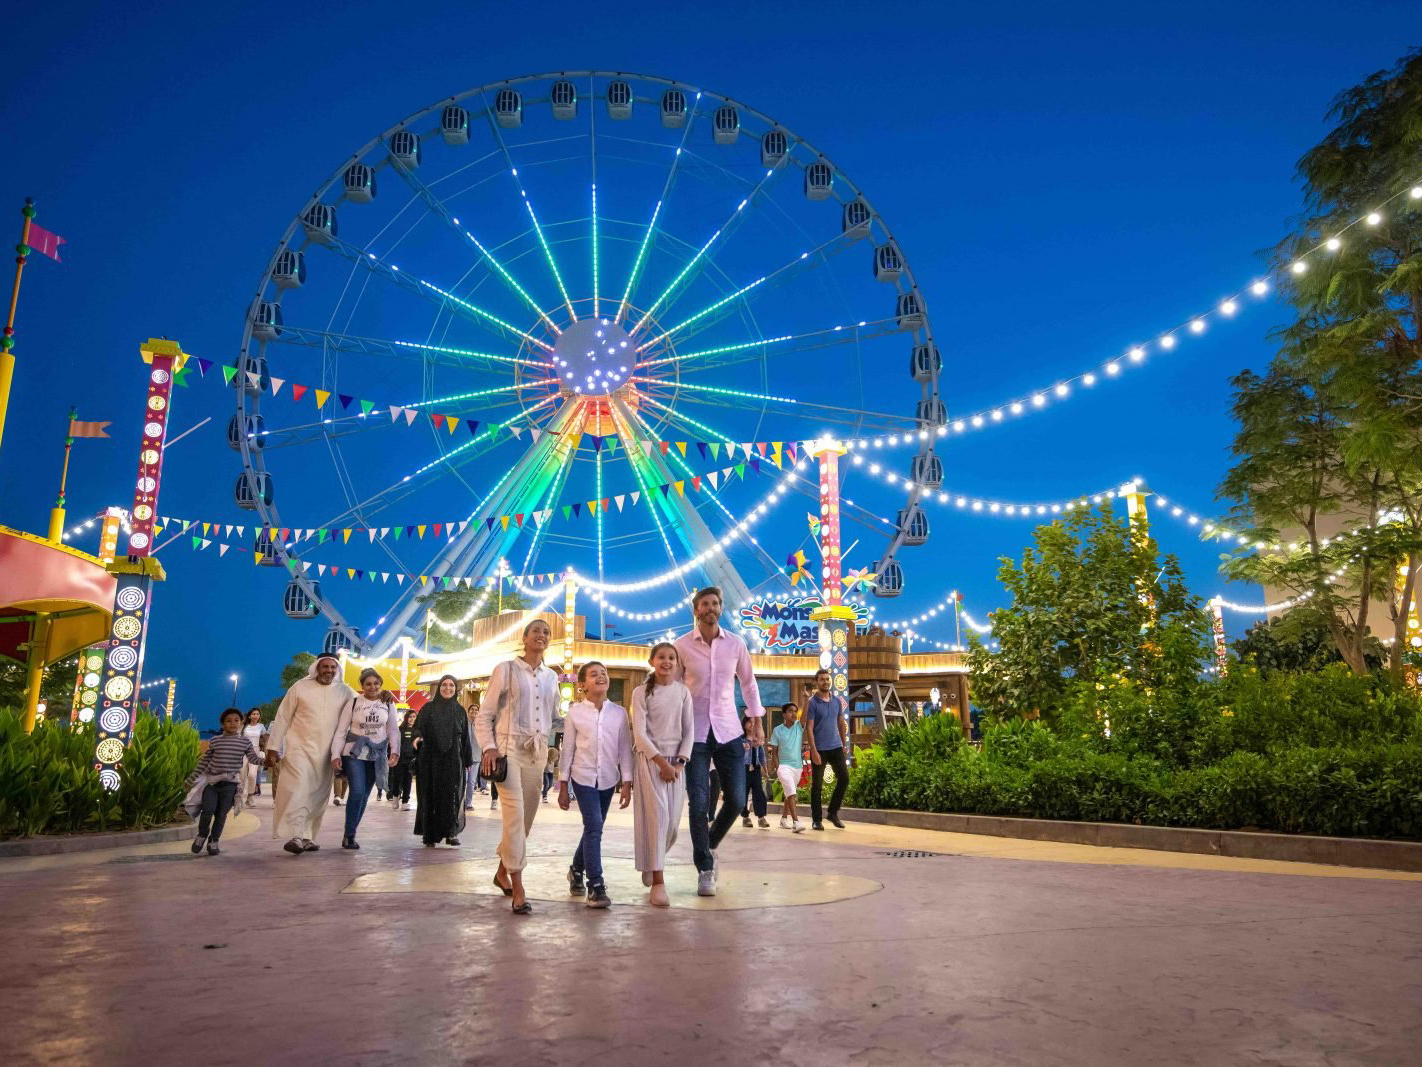 UAE Travel Guide for First Time Visitors - Dubai Parks and Resorts, Dubai